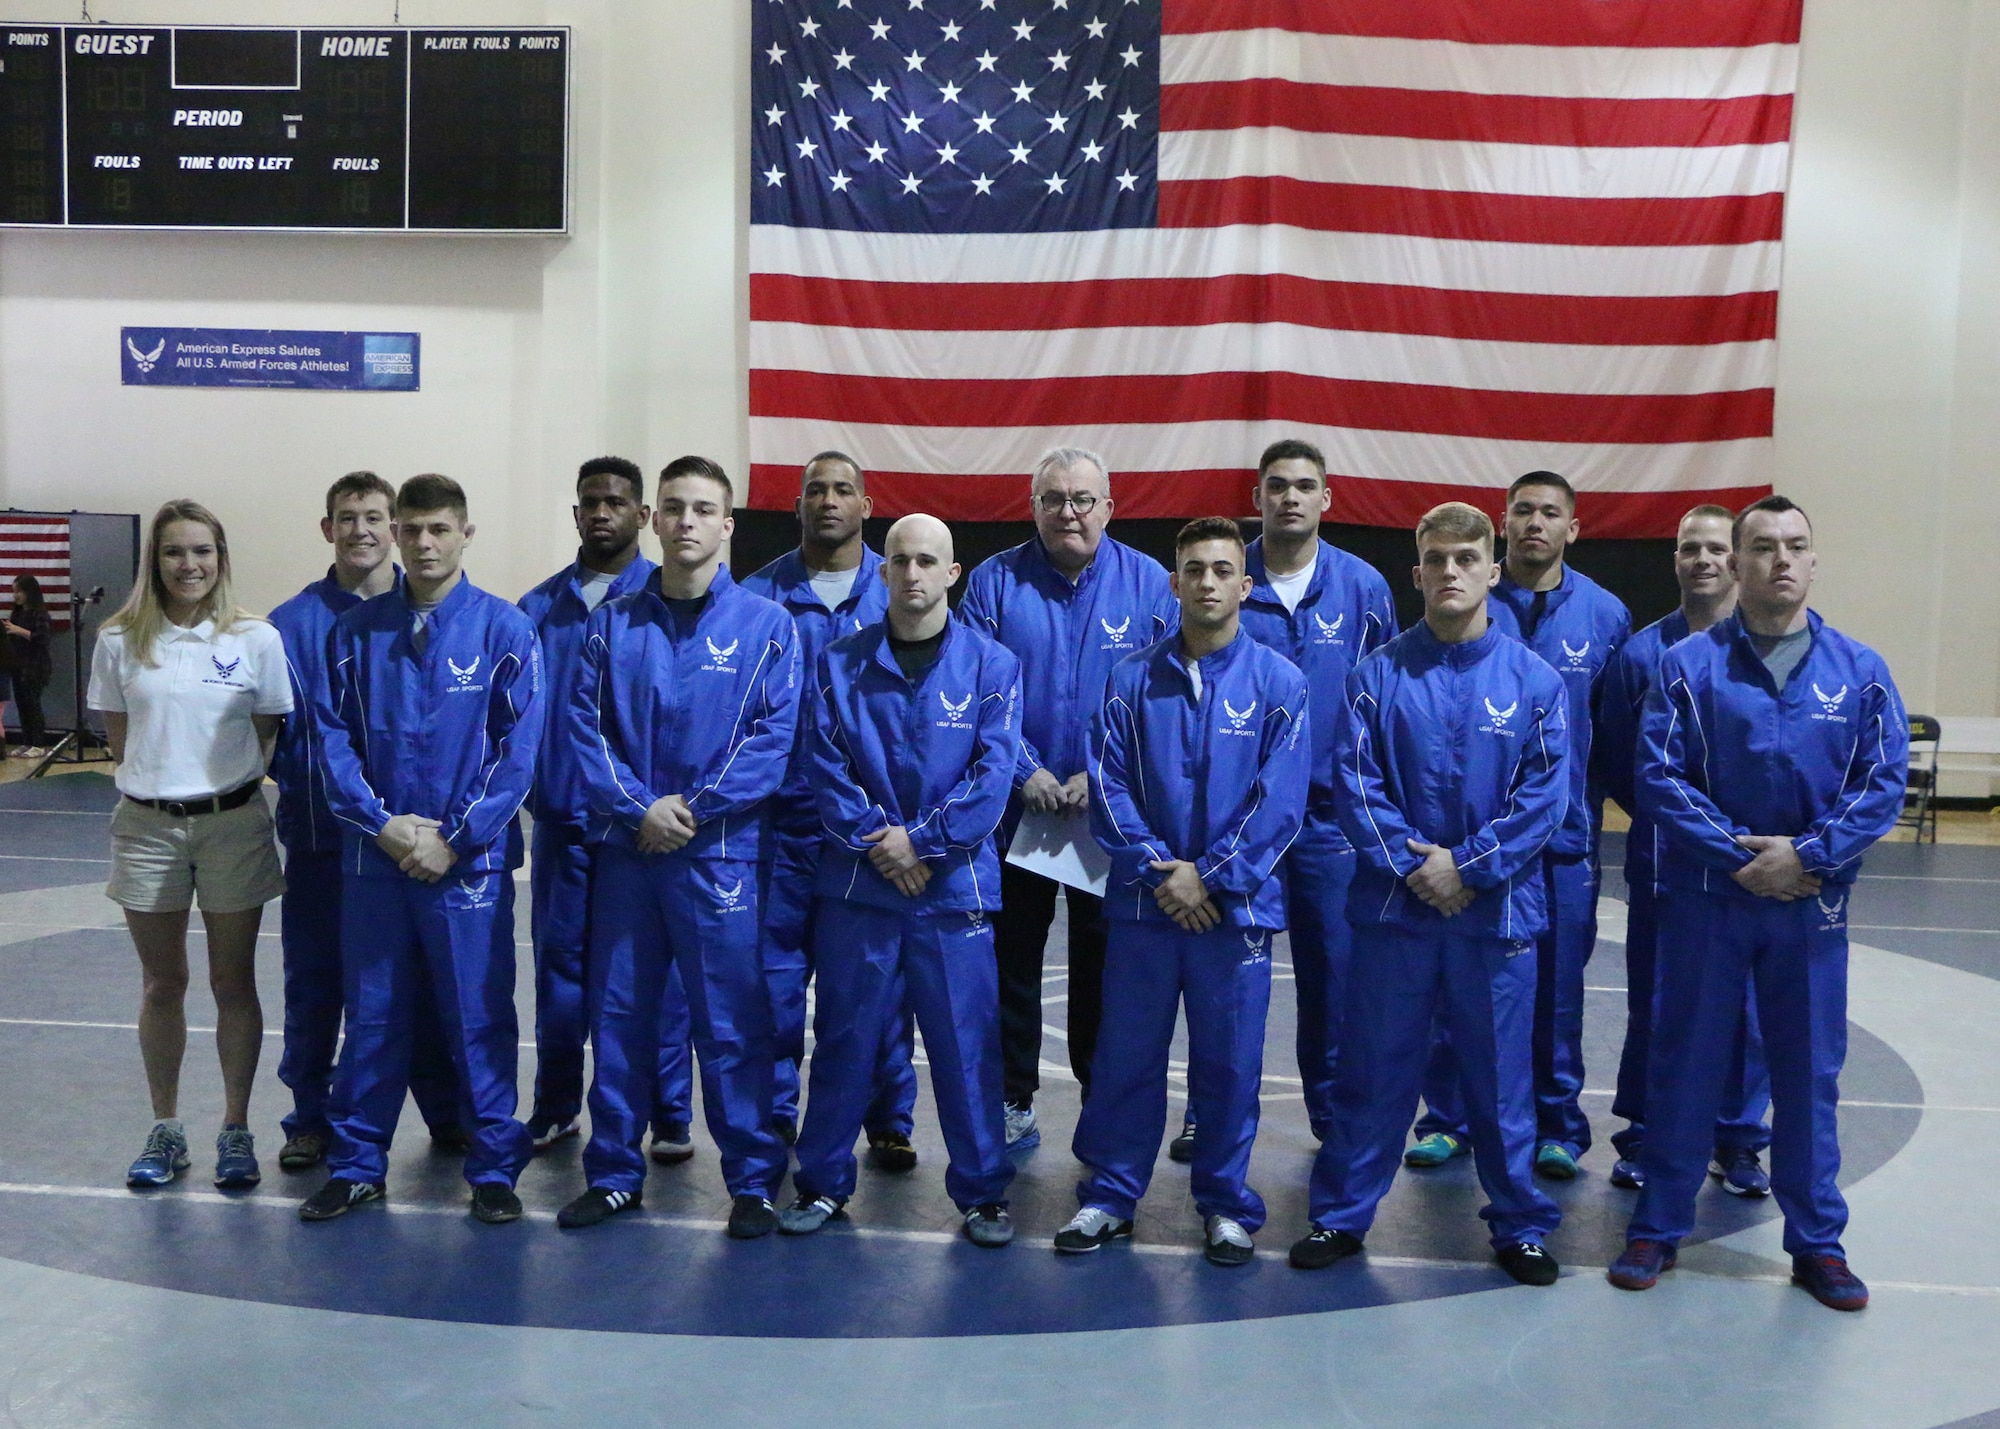 The 2017 Armed Forces Championship Air Force Wrestling team Febuary 26, 2017, at Joint Base McGuire-Dix-Lakehurst, NJ. (U.S Air Force courtesy photo)